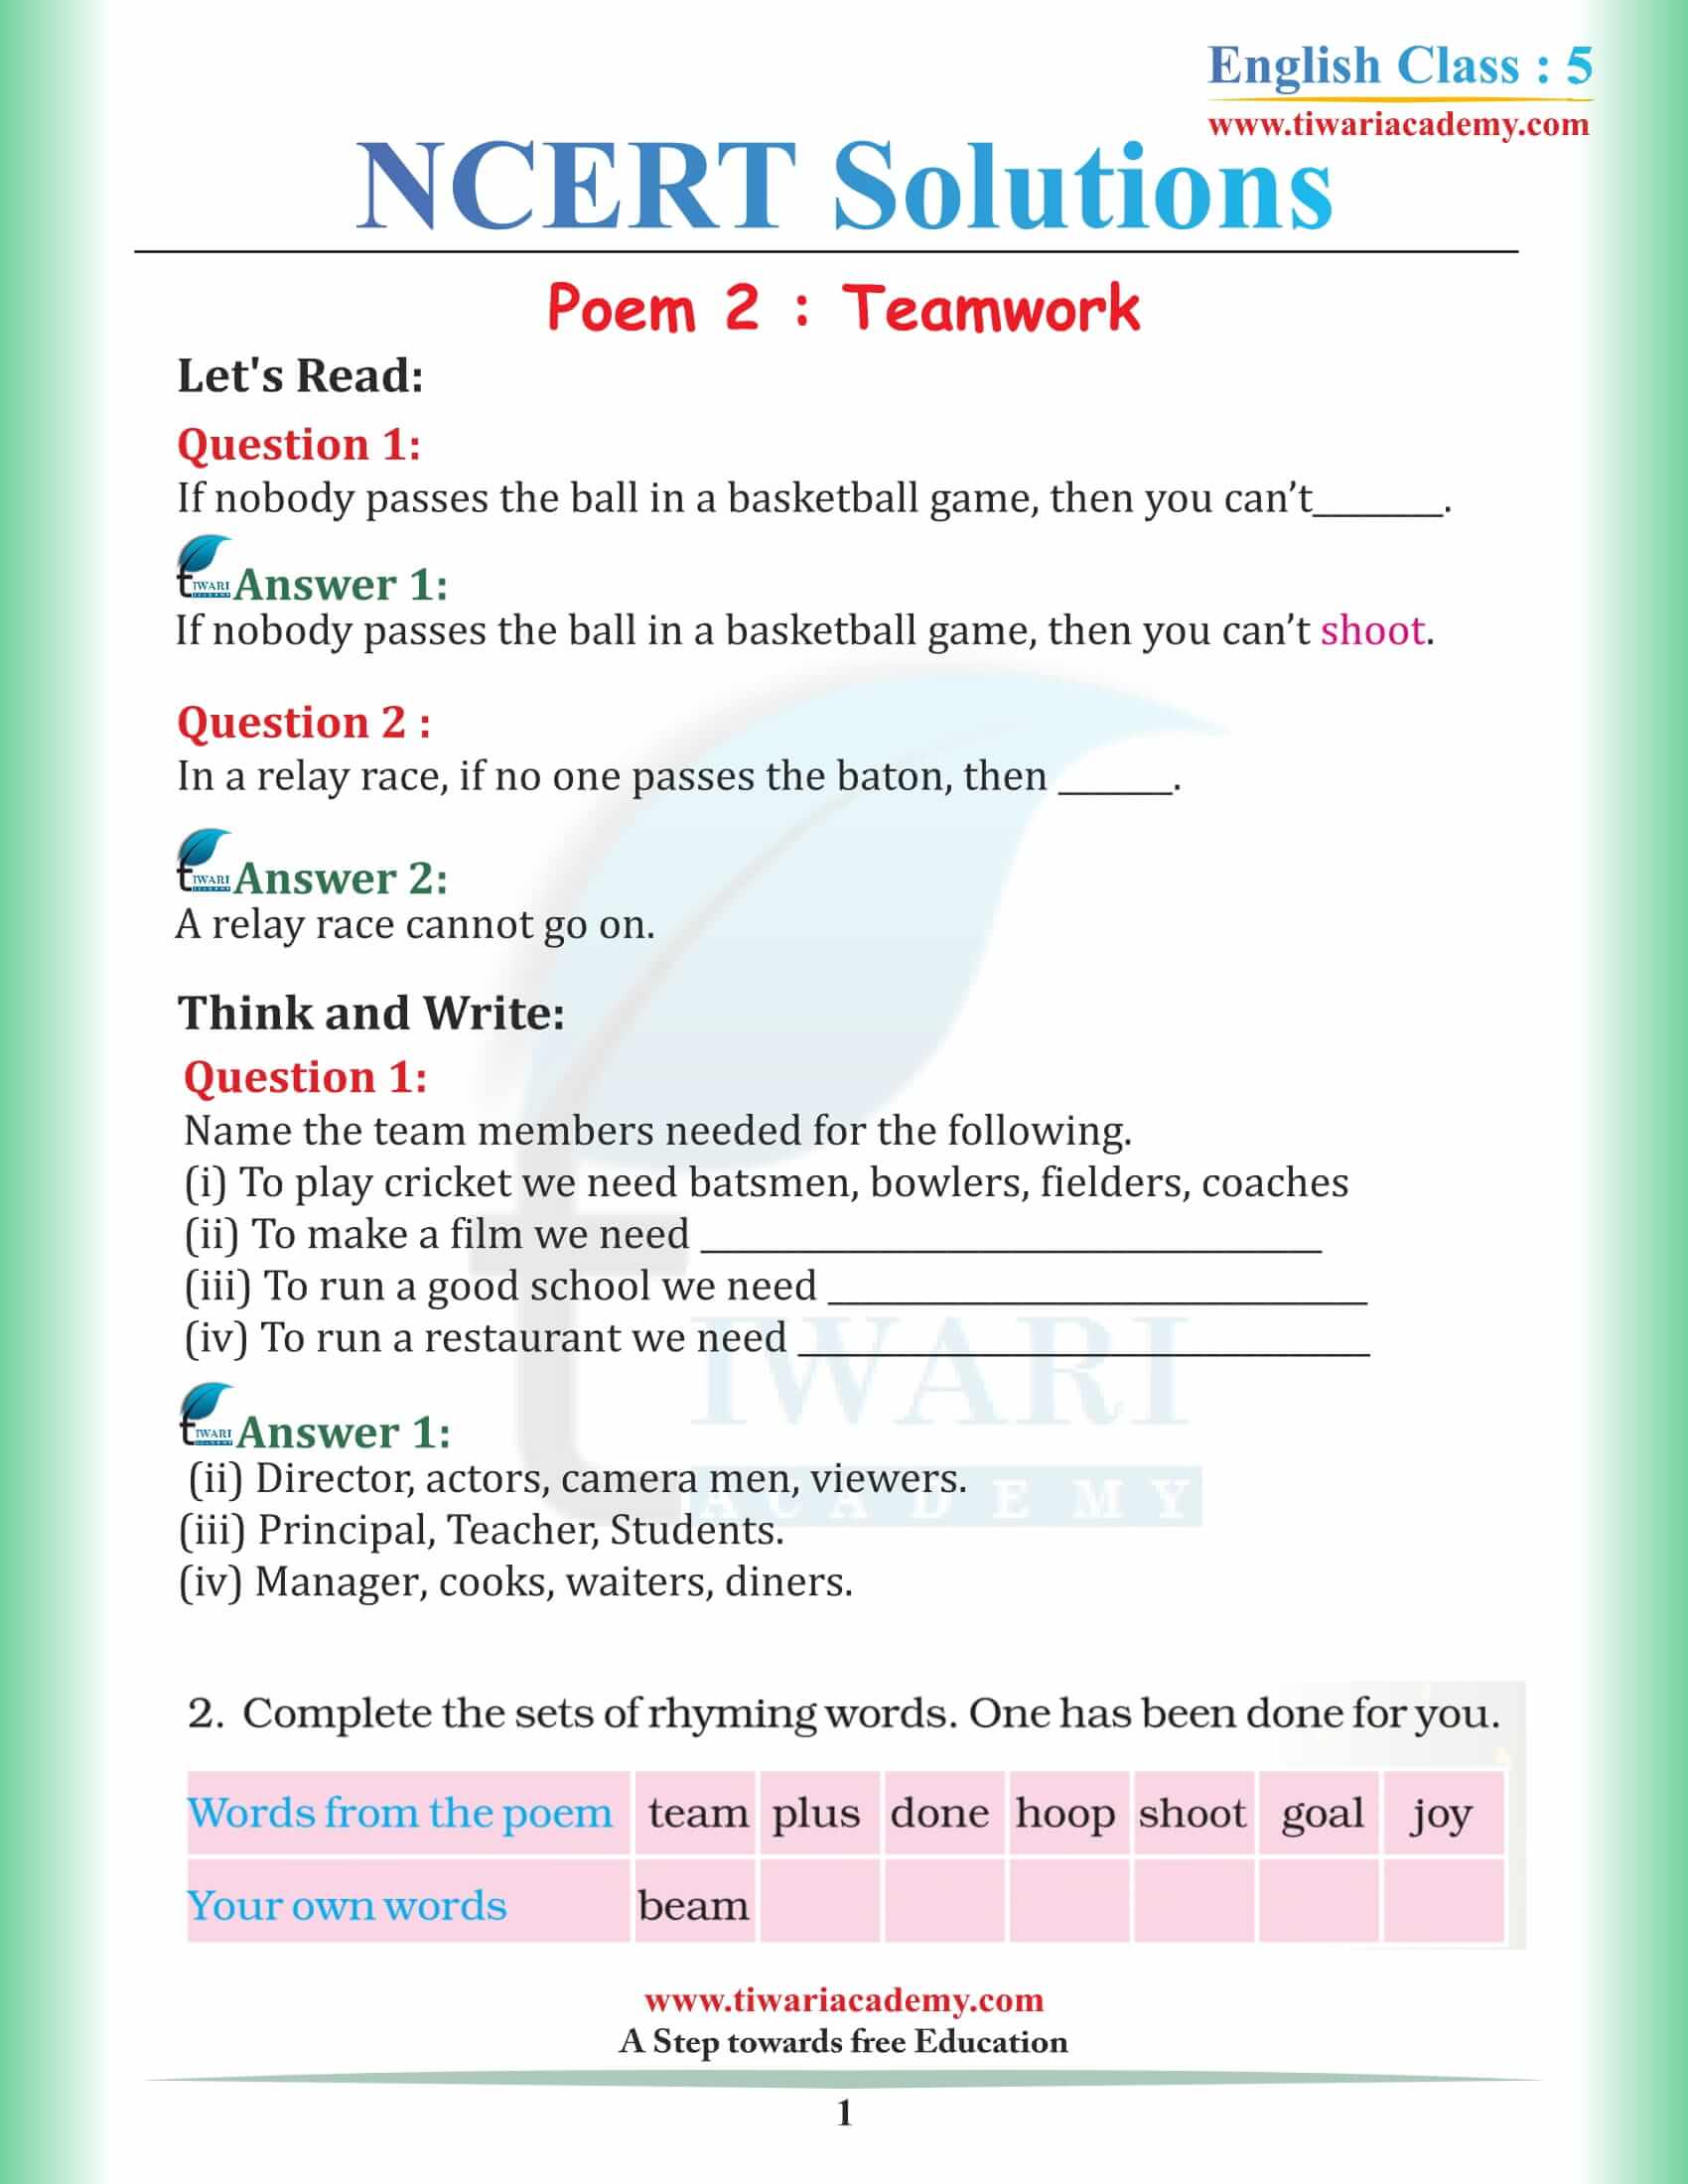 NCERT Solutions for Class 5 English Chapter 2 (Unit II) Teamwork